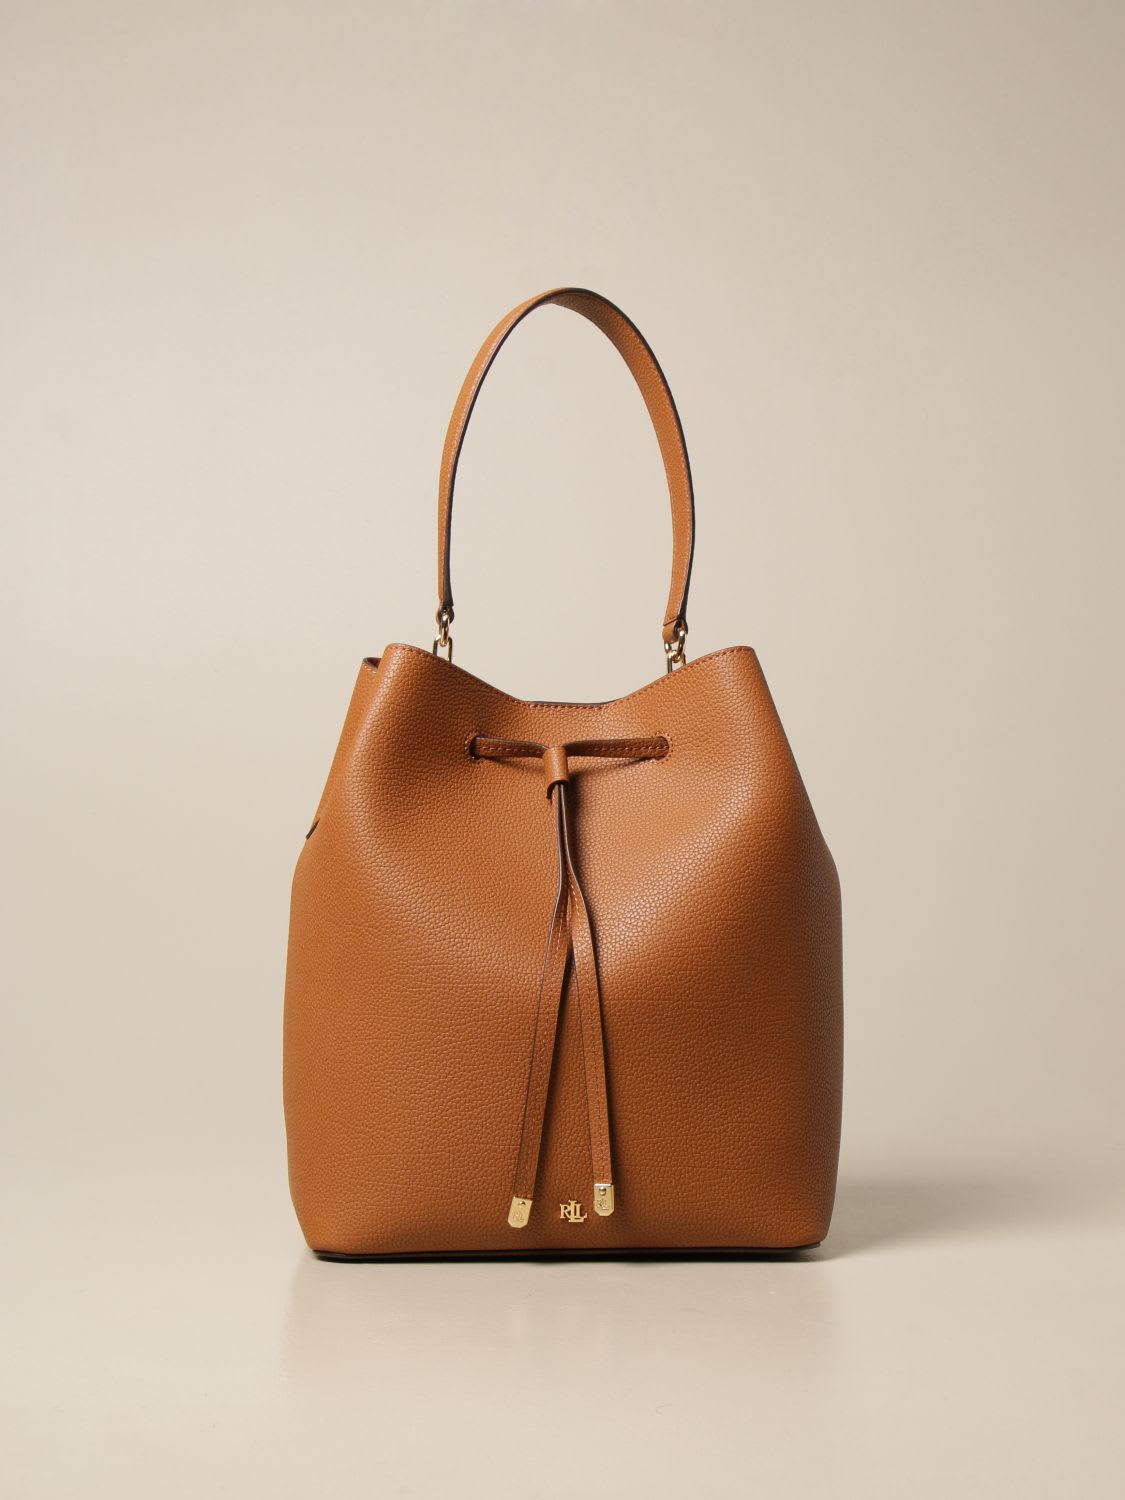 Lauren Ralph Lauren Handbag Lauren Ralph Lauren Bucket Bag In Grained Leather